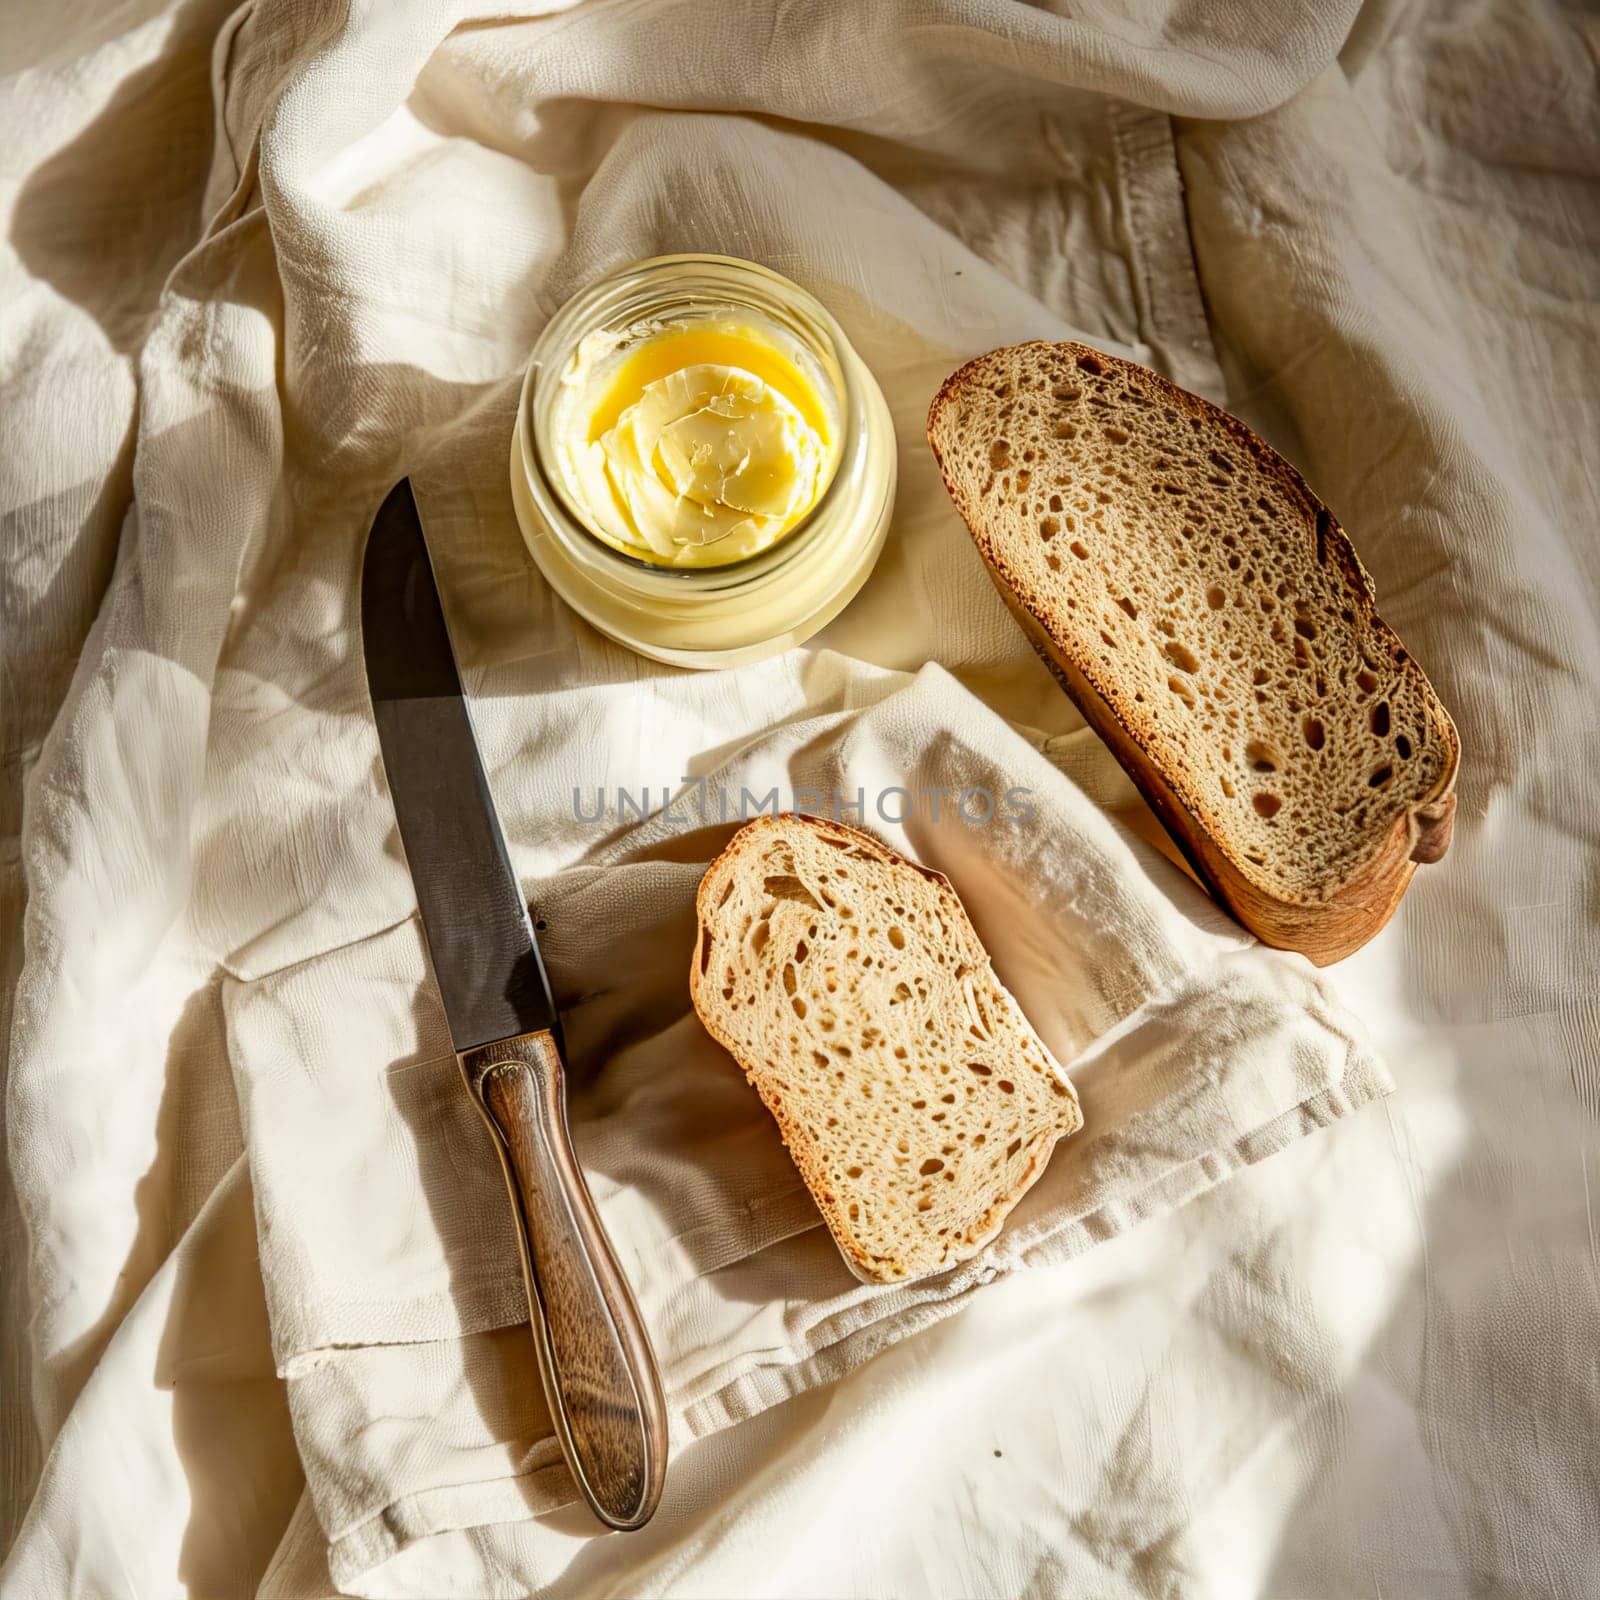 Top view of a jar of ghee and two slices of healthy whole grain bread on a light background. Healthy diet.